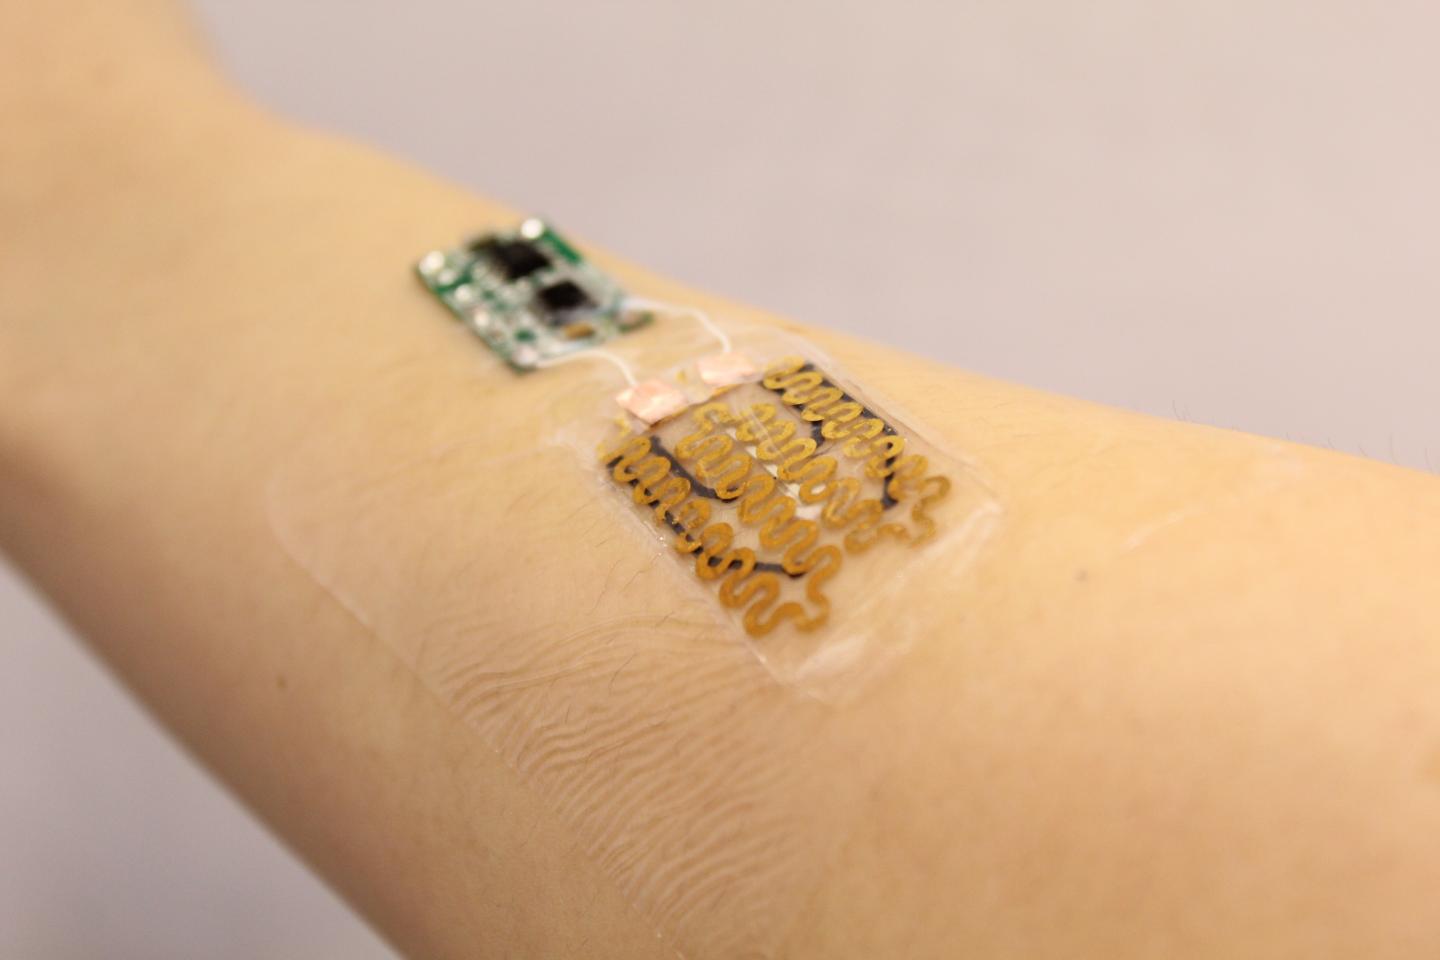 Smart Bandage with Sensors and Microprocessor